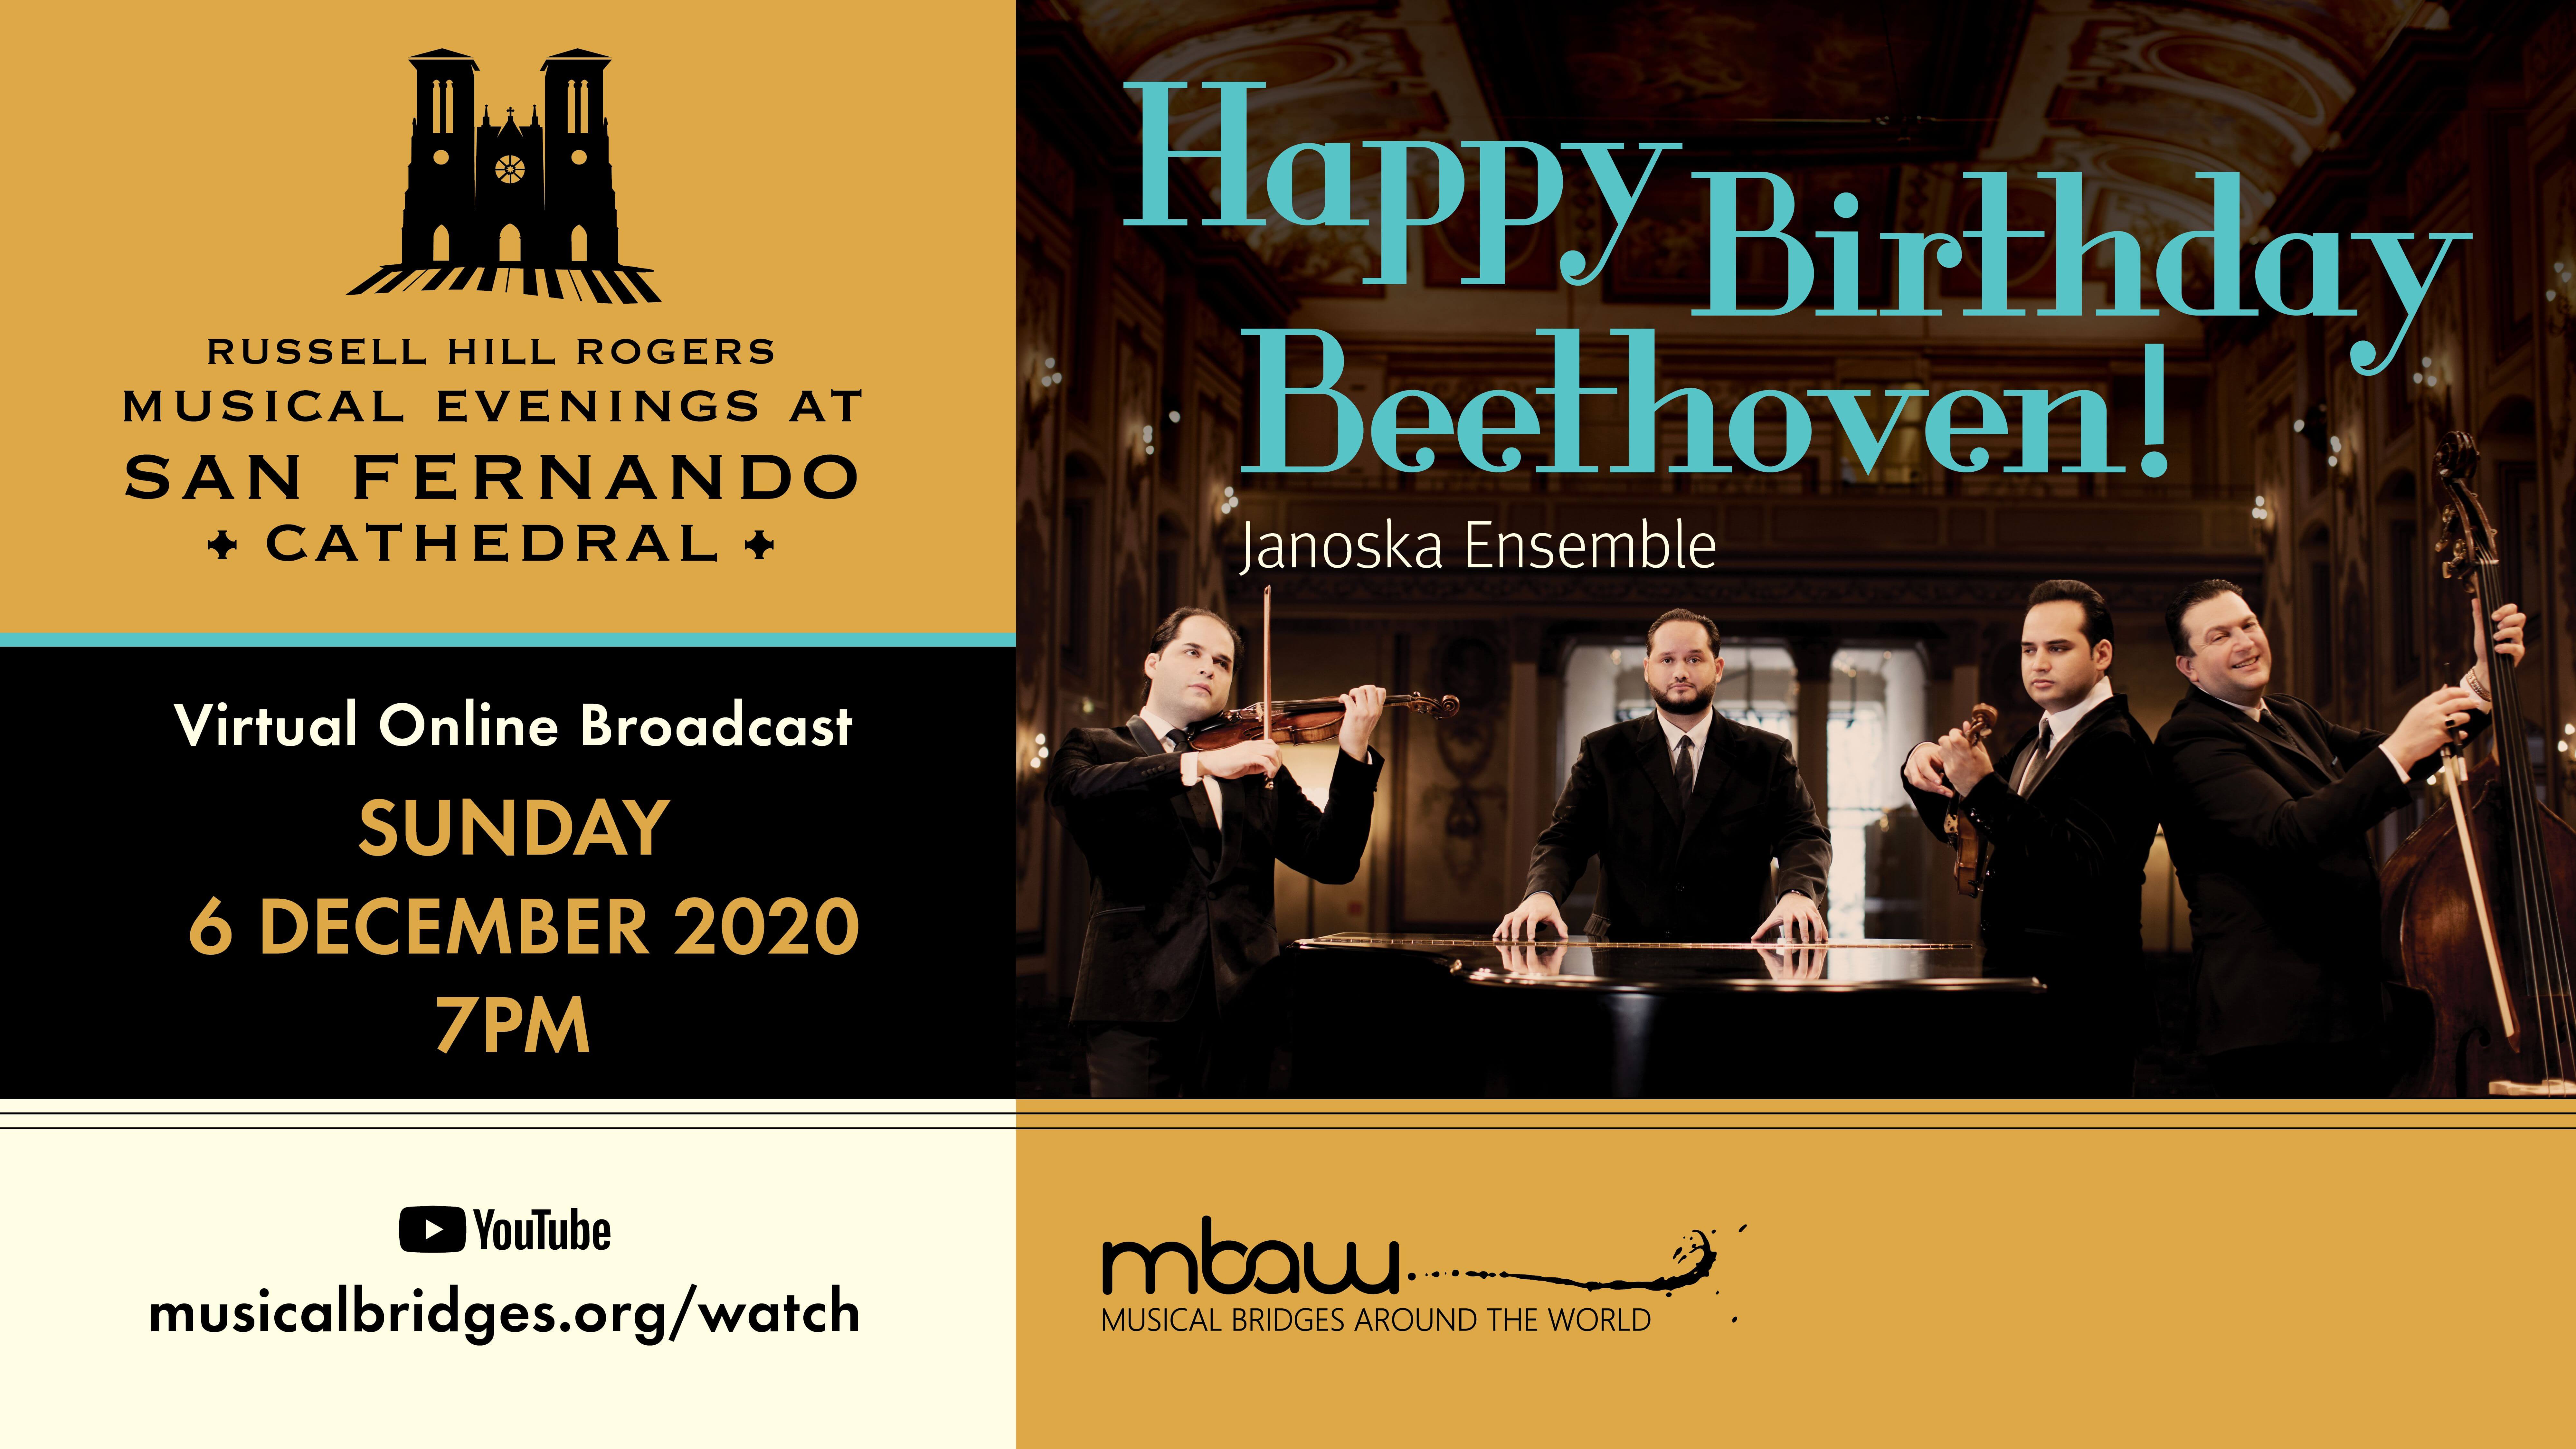 Happy Birthday Beethoven! | Musical Evenings at San Fernando Cathedral